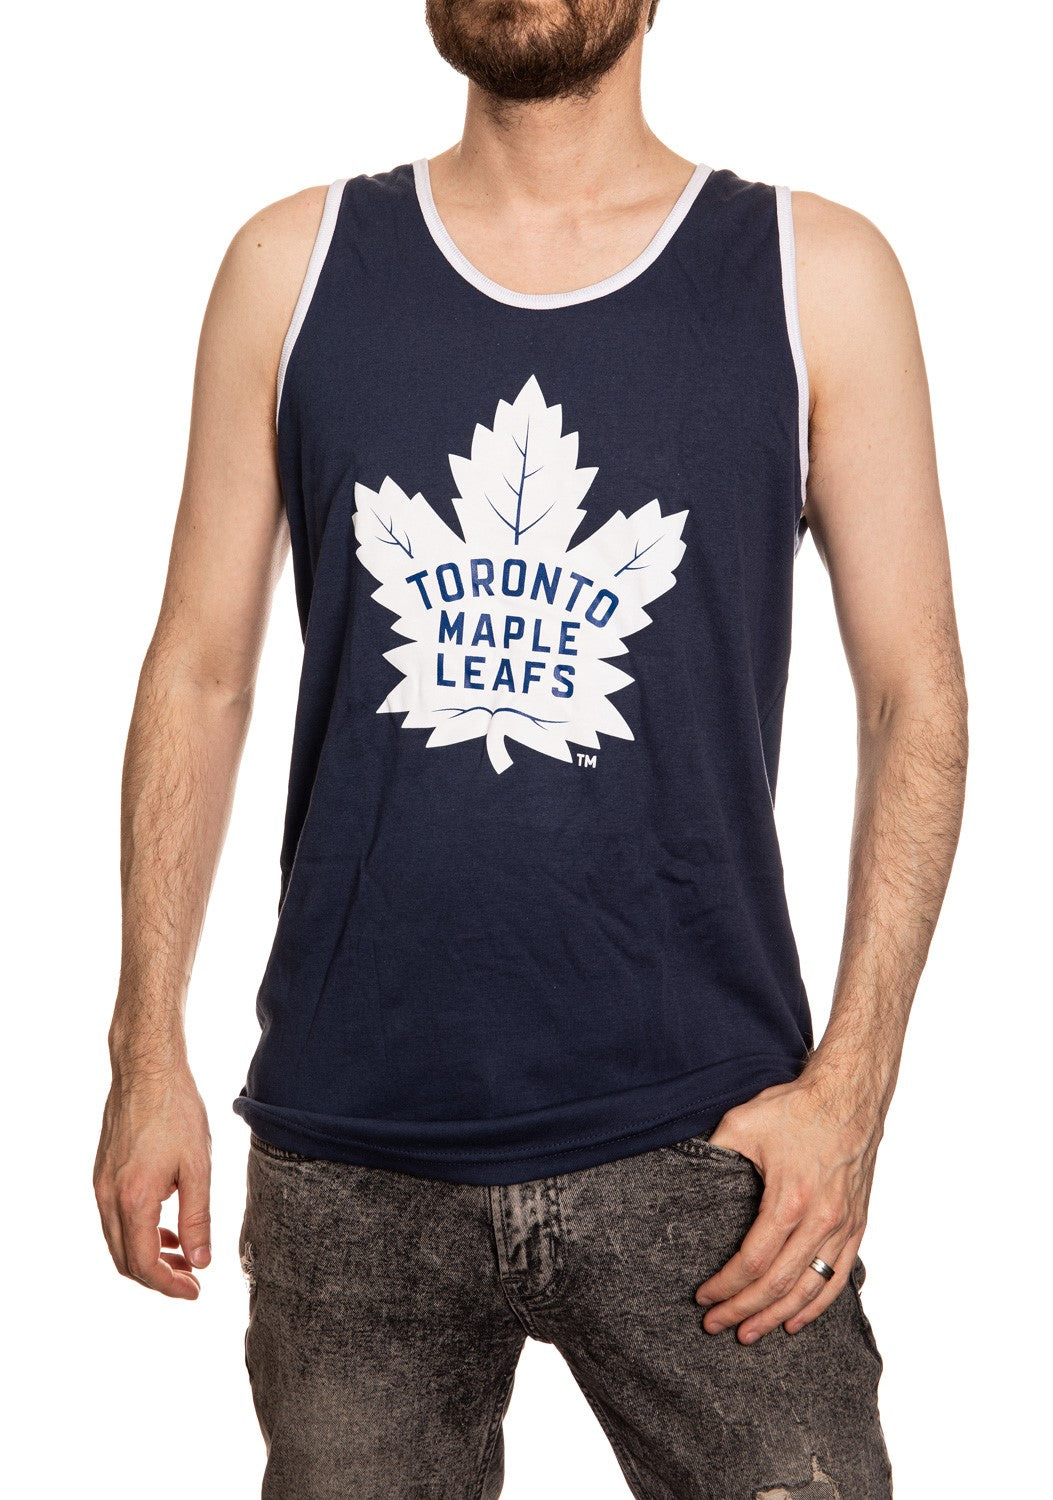 Toronto Maple Leafs NHL Classic Cotton Tank Top for Men